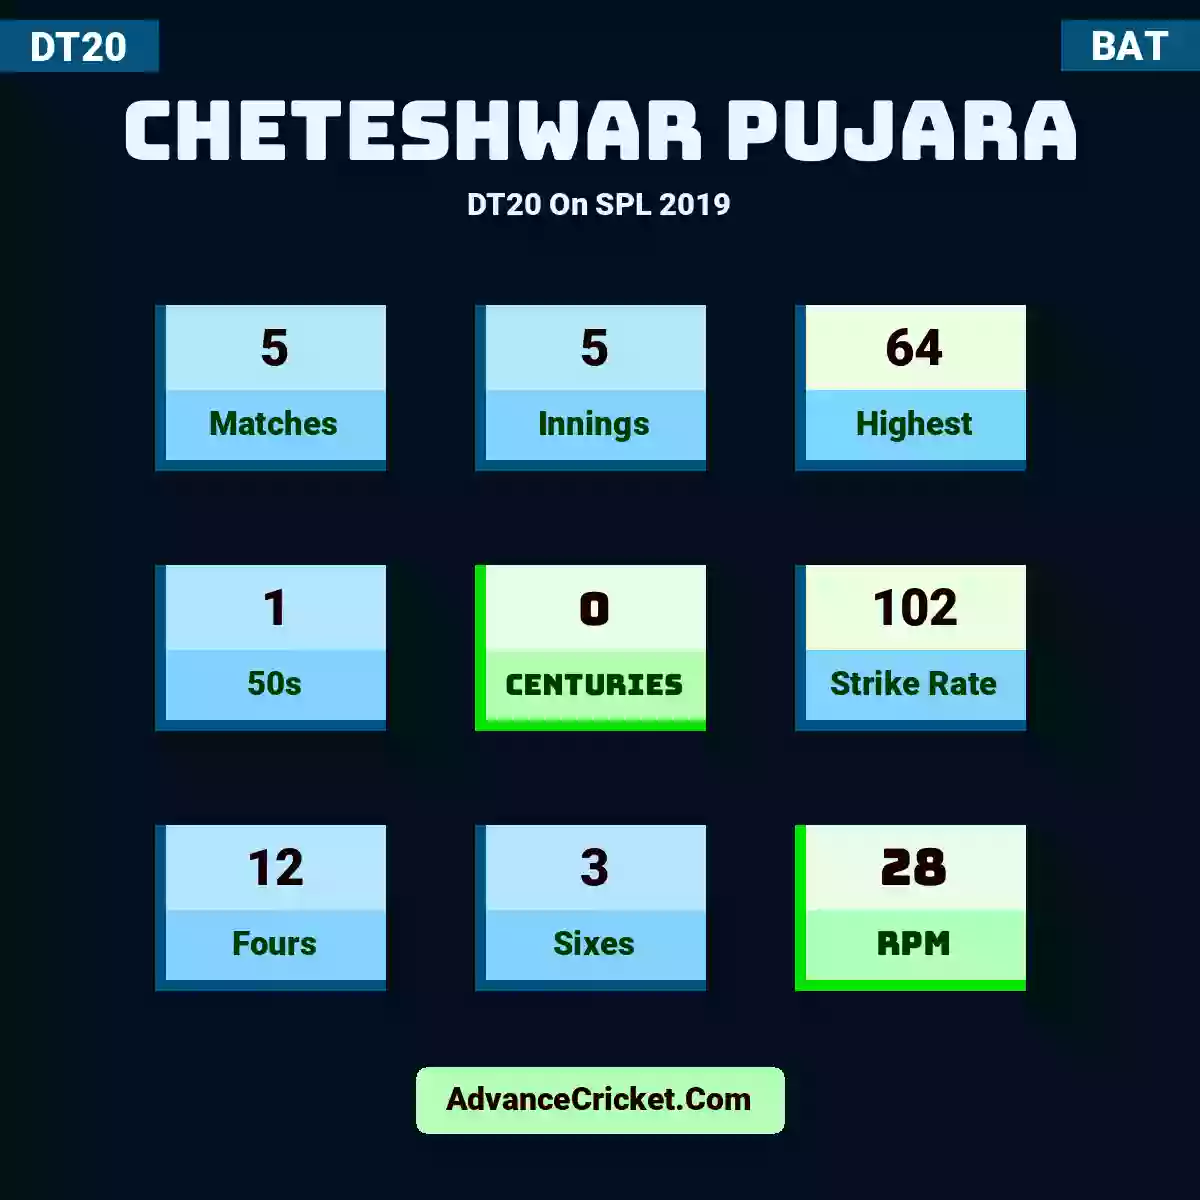 Cheteshwar Pujara DT20  On SPL 2019, Cheteshwar Pujara played 5 matches, scored 64 runs as highest, 1 half-centuries, and 0 centuries, with a strike rate of 102. C.Pujara hit 12 fours and 3 sixes, with an RPM of 28.